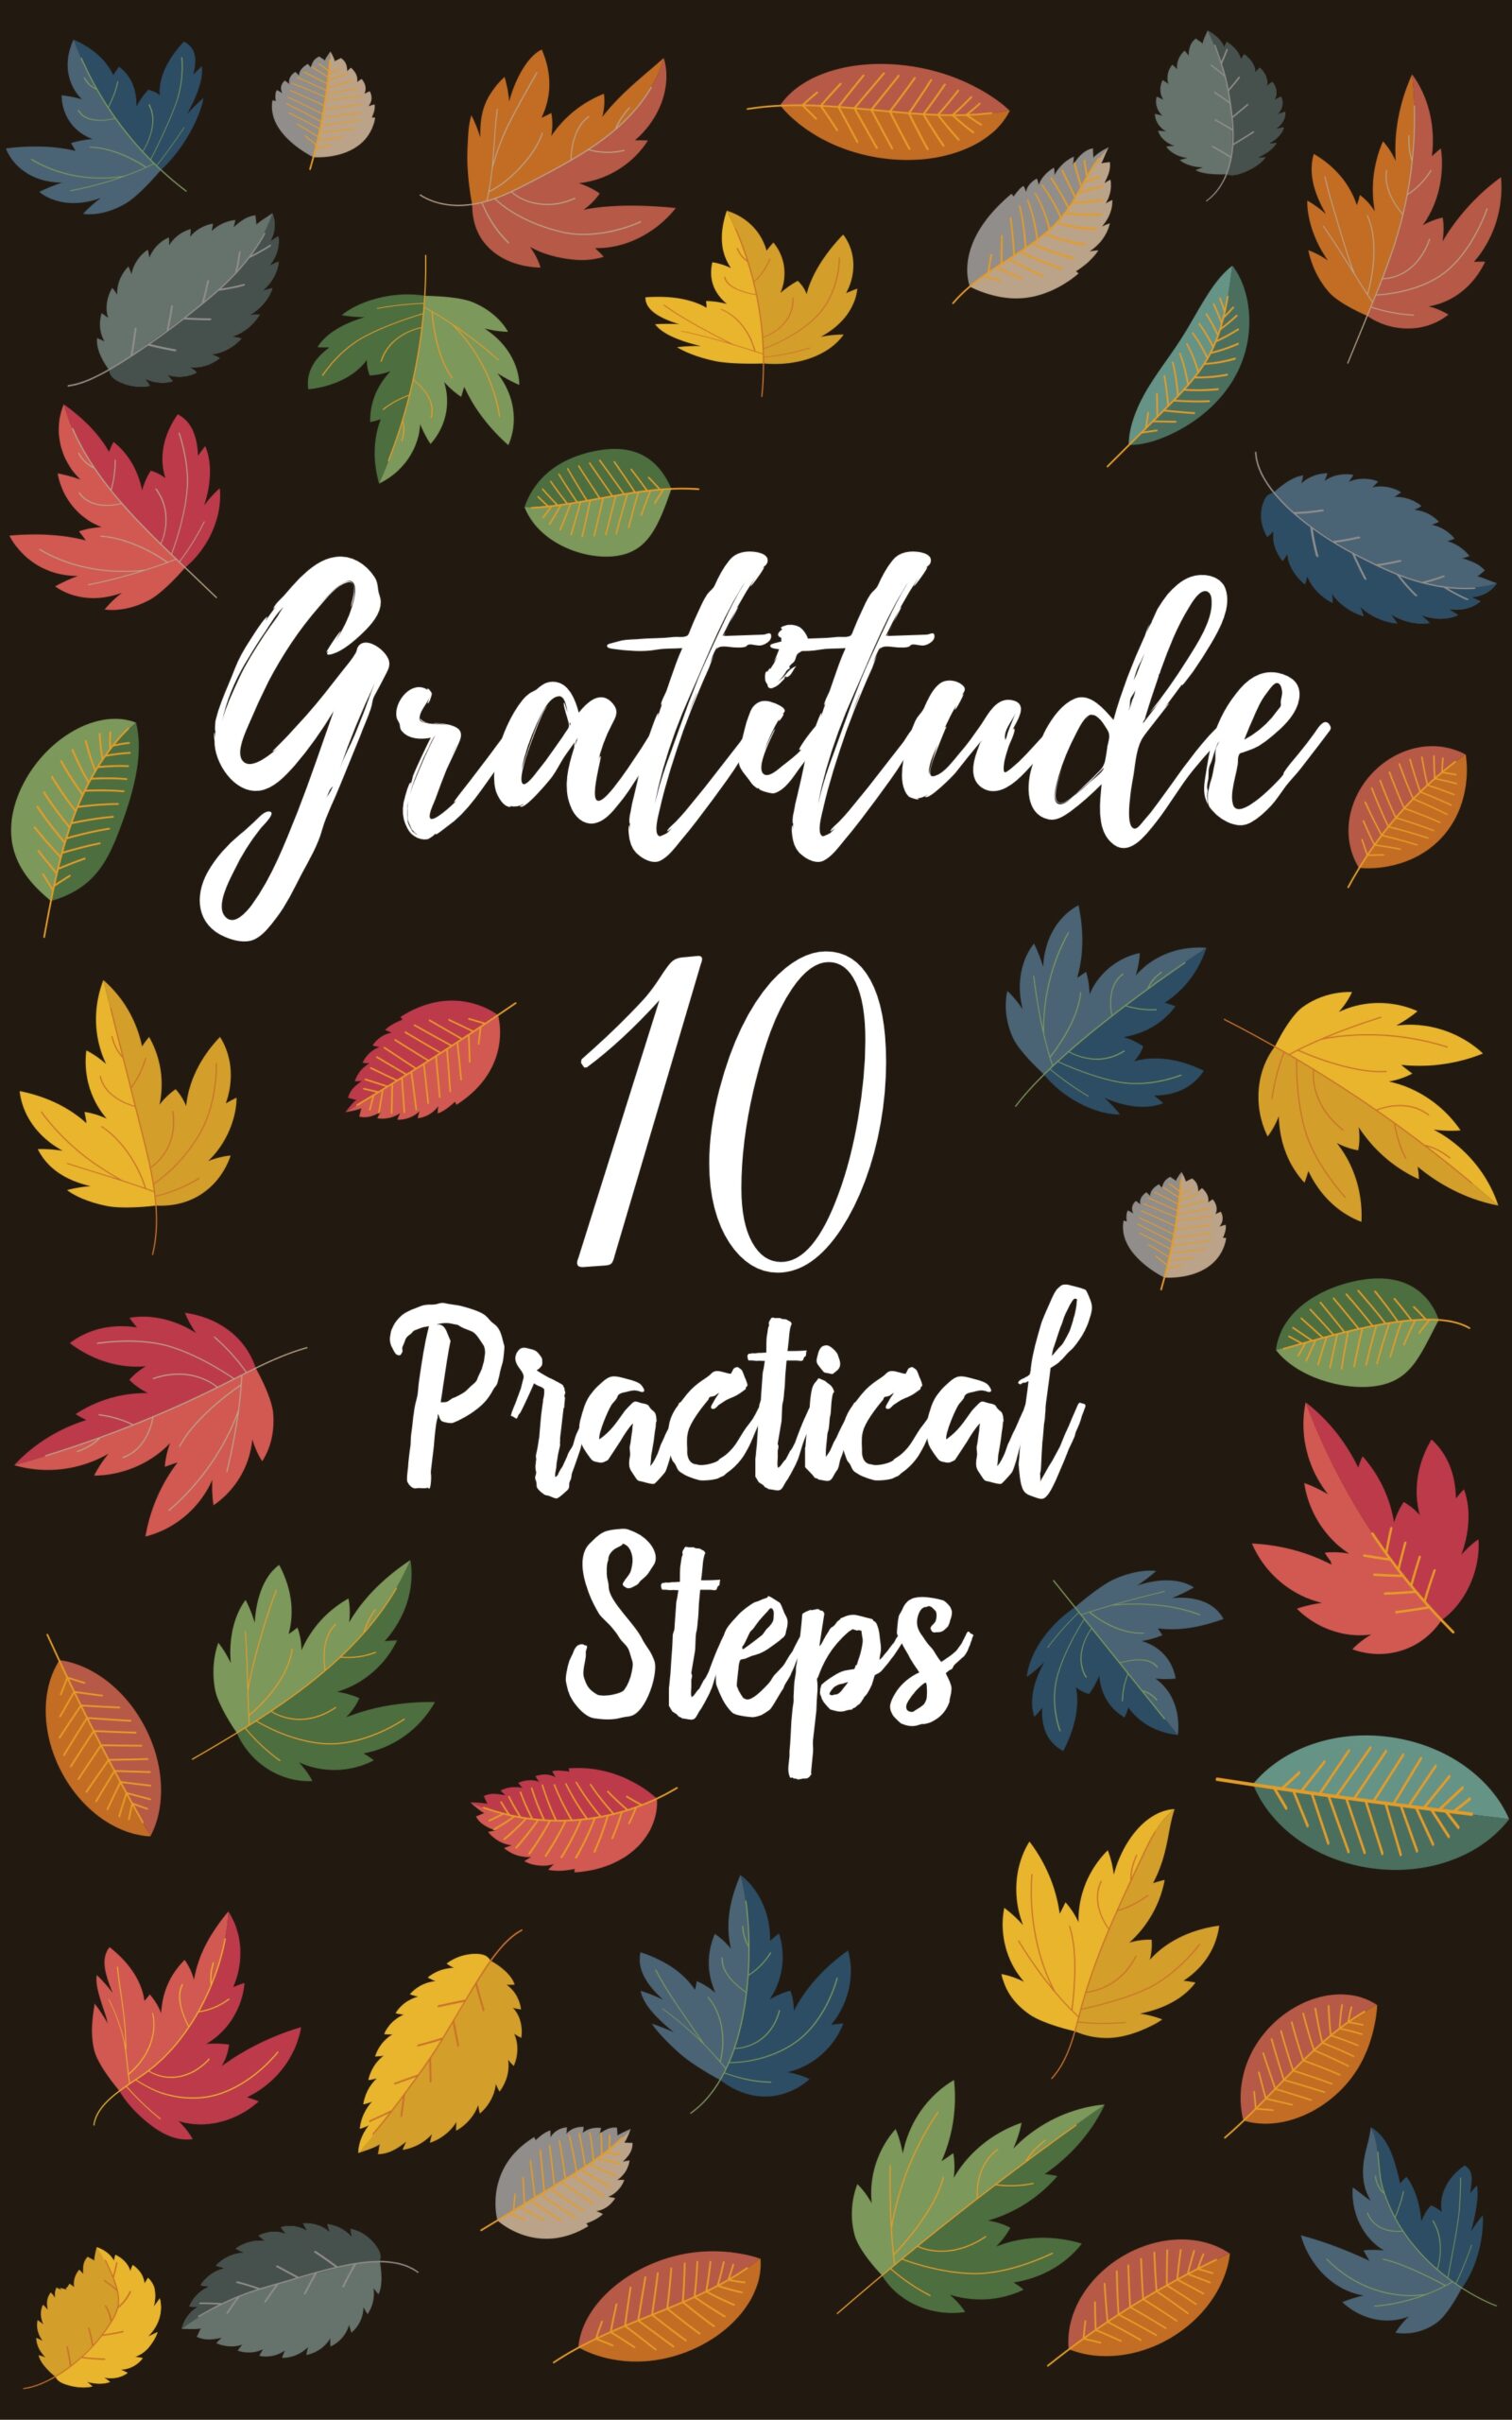 FREE: Gratitude 10 Practical Steps – Gratitude Journal 5 Minutes Good Days to Develop Gratitude – Making Peace with Ourselves – Gratitude as a Way of Life – What is Gratitude?: Gratitude Kindle eBook by Joseph Son